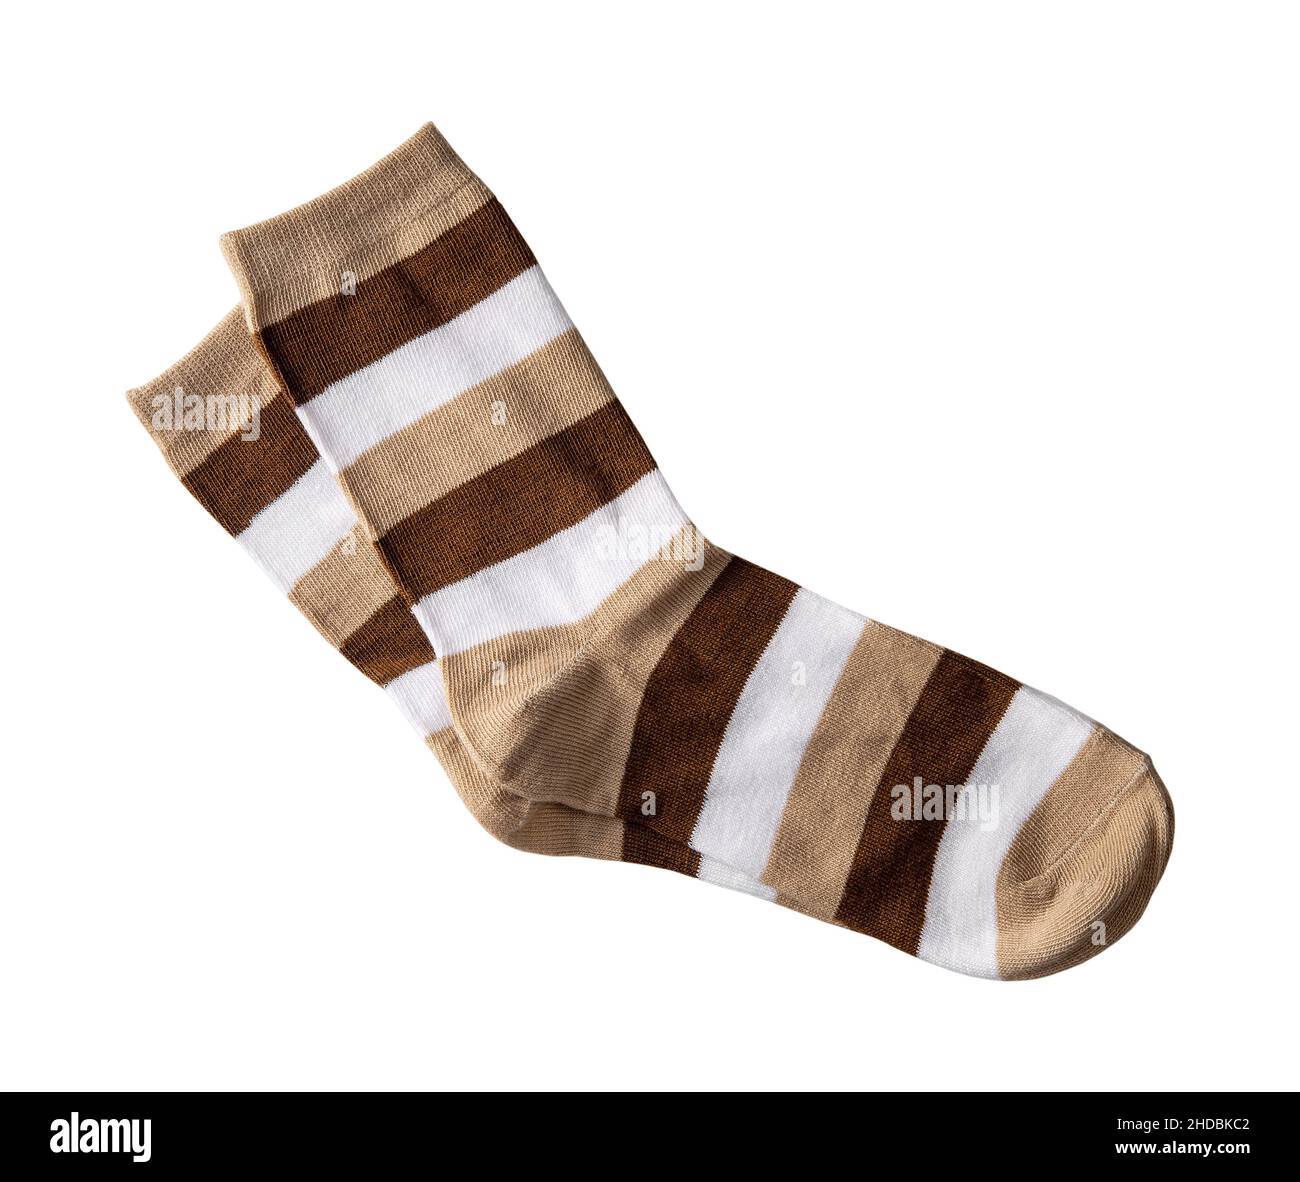 Tall white brown socks isolated on a white background. Pair of stripped multi-colored cotton socks close-up. Hosiery design element for active lifesty Stock Photo